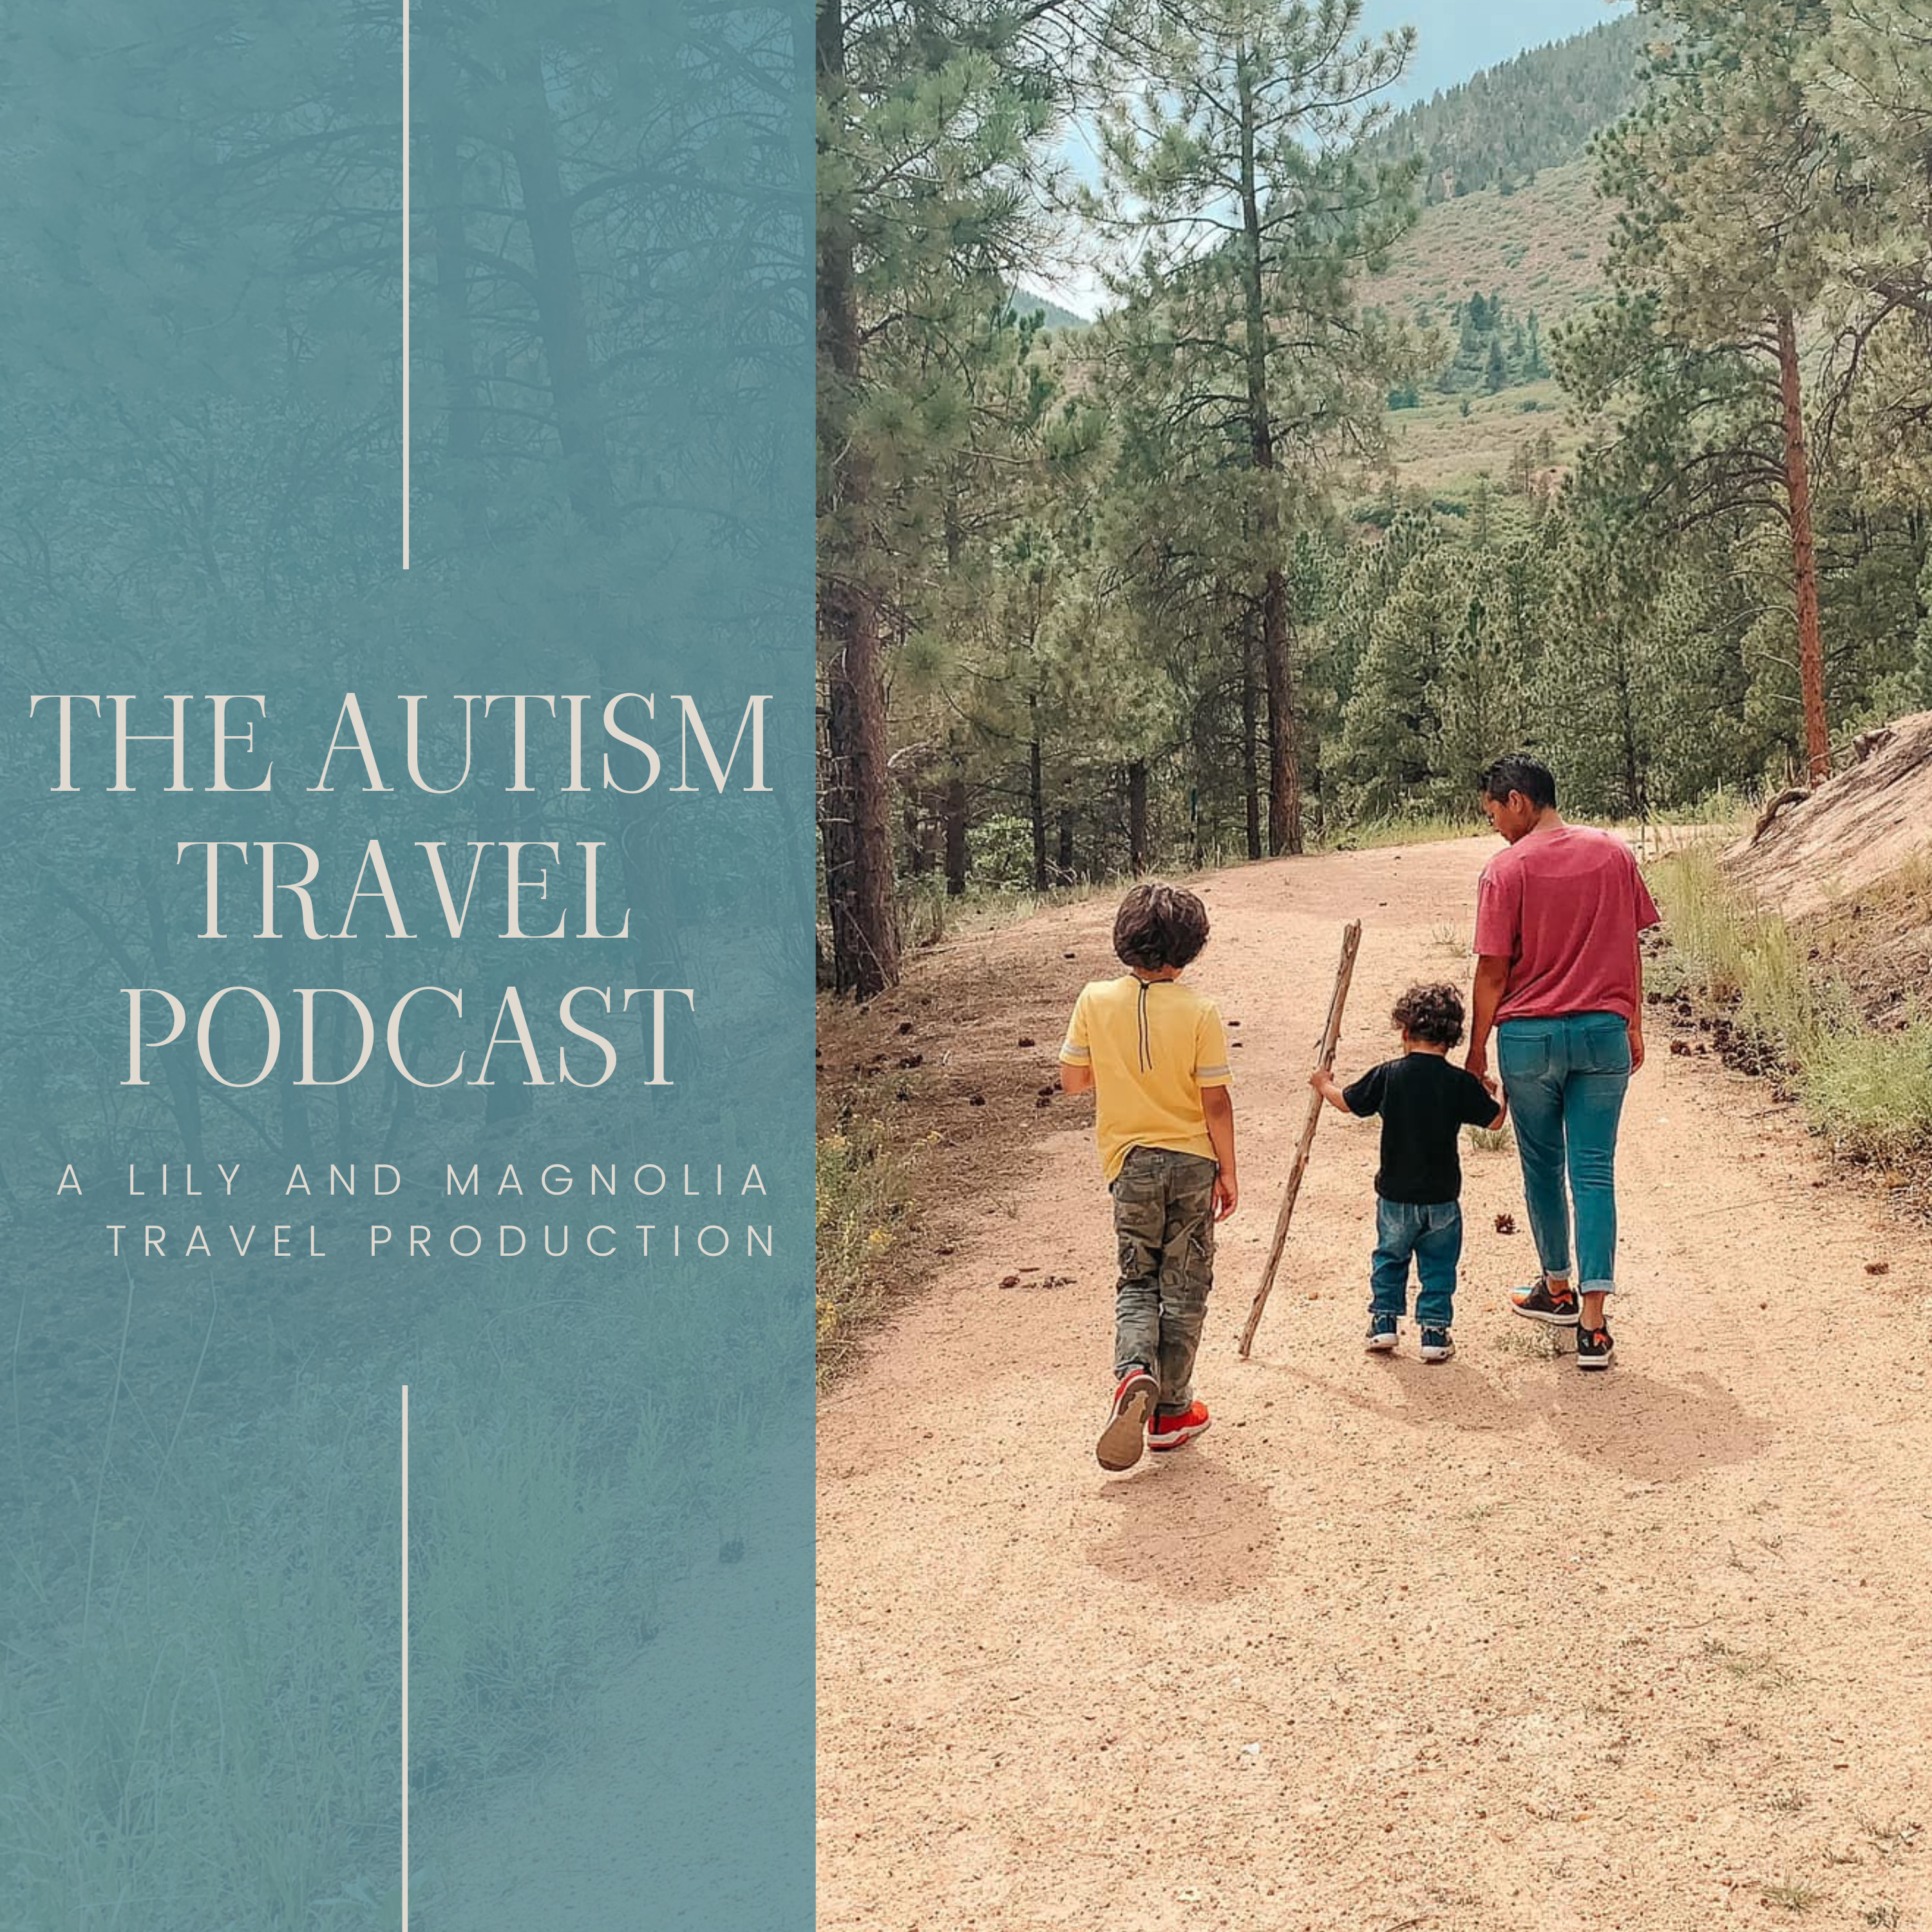 The Autism Travel Podcast